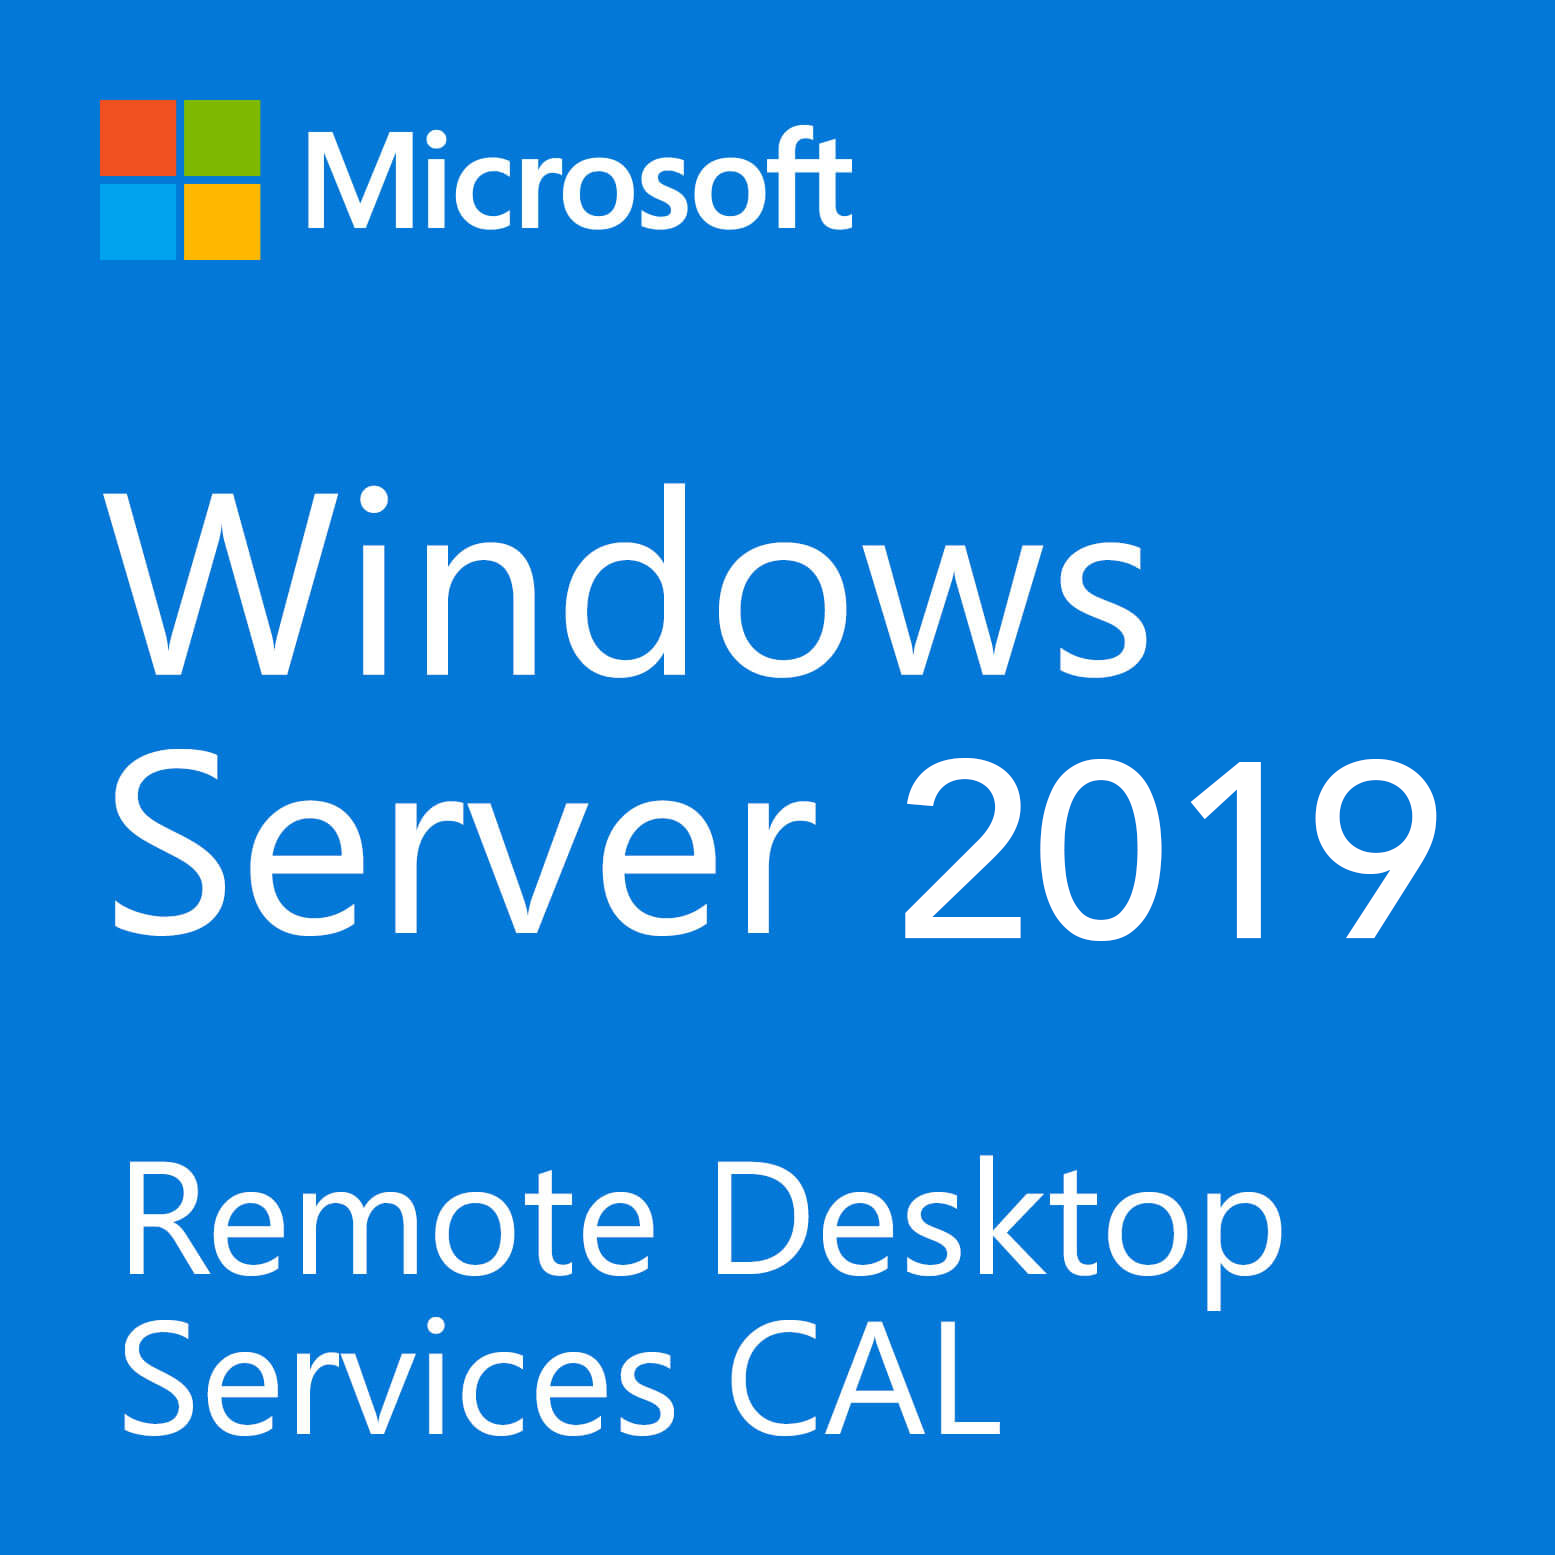 CAL RDS USER / DEVICE for Windows Server 2019